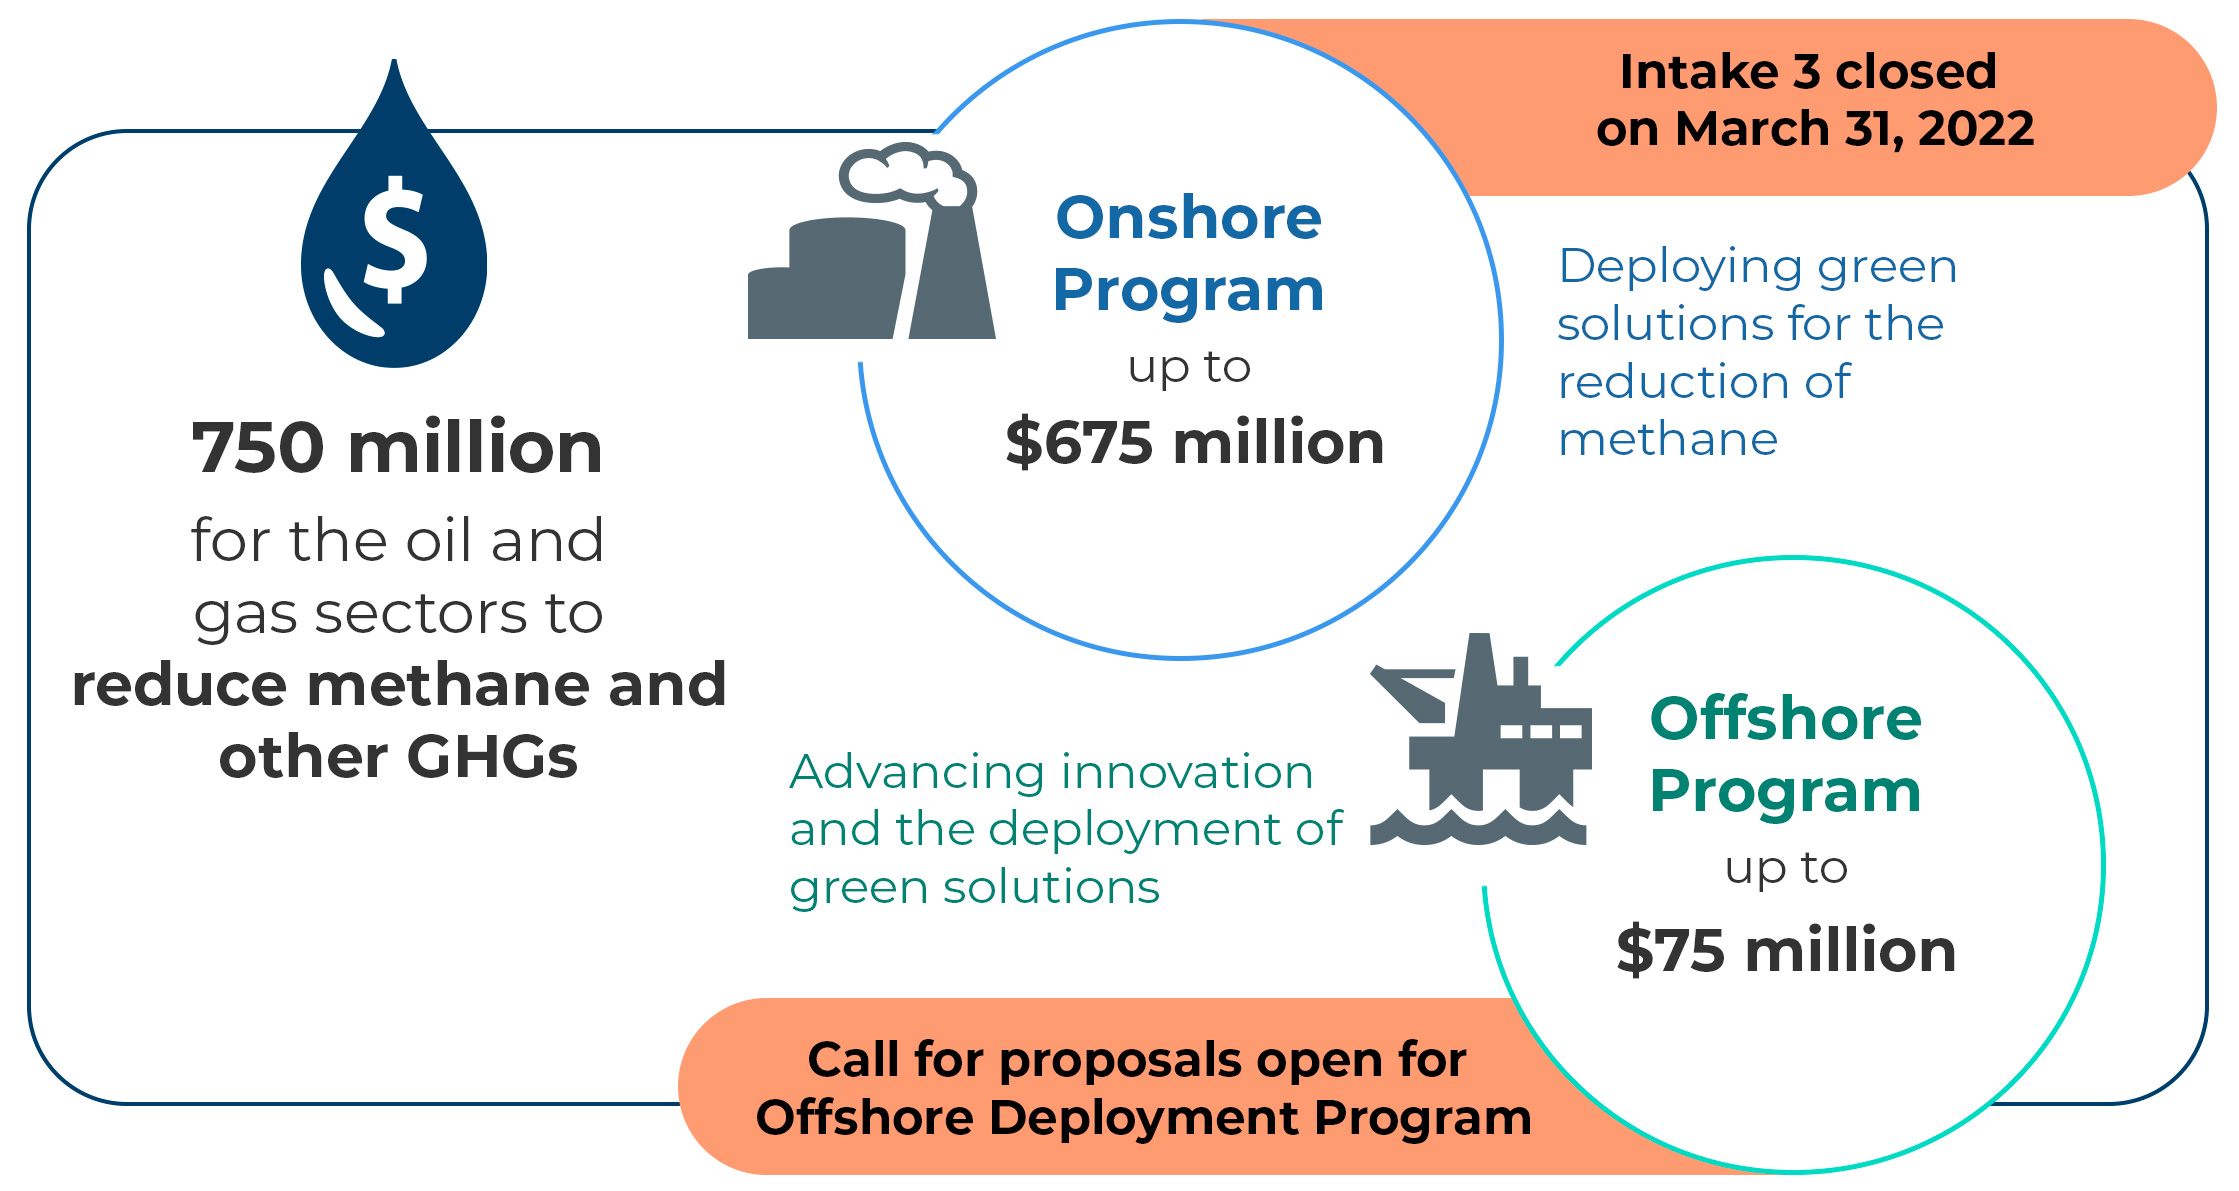 Up to $675 million for the Onshore Program and up to $75 million for the Offshore Program.